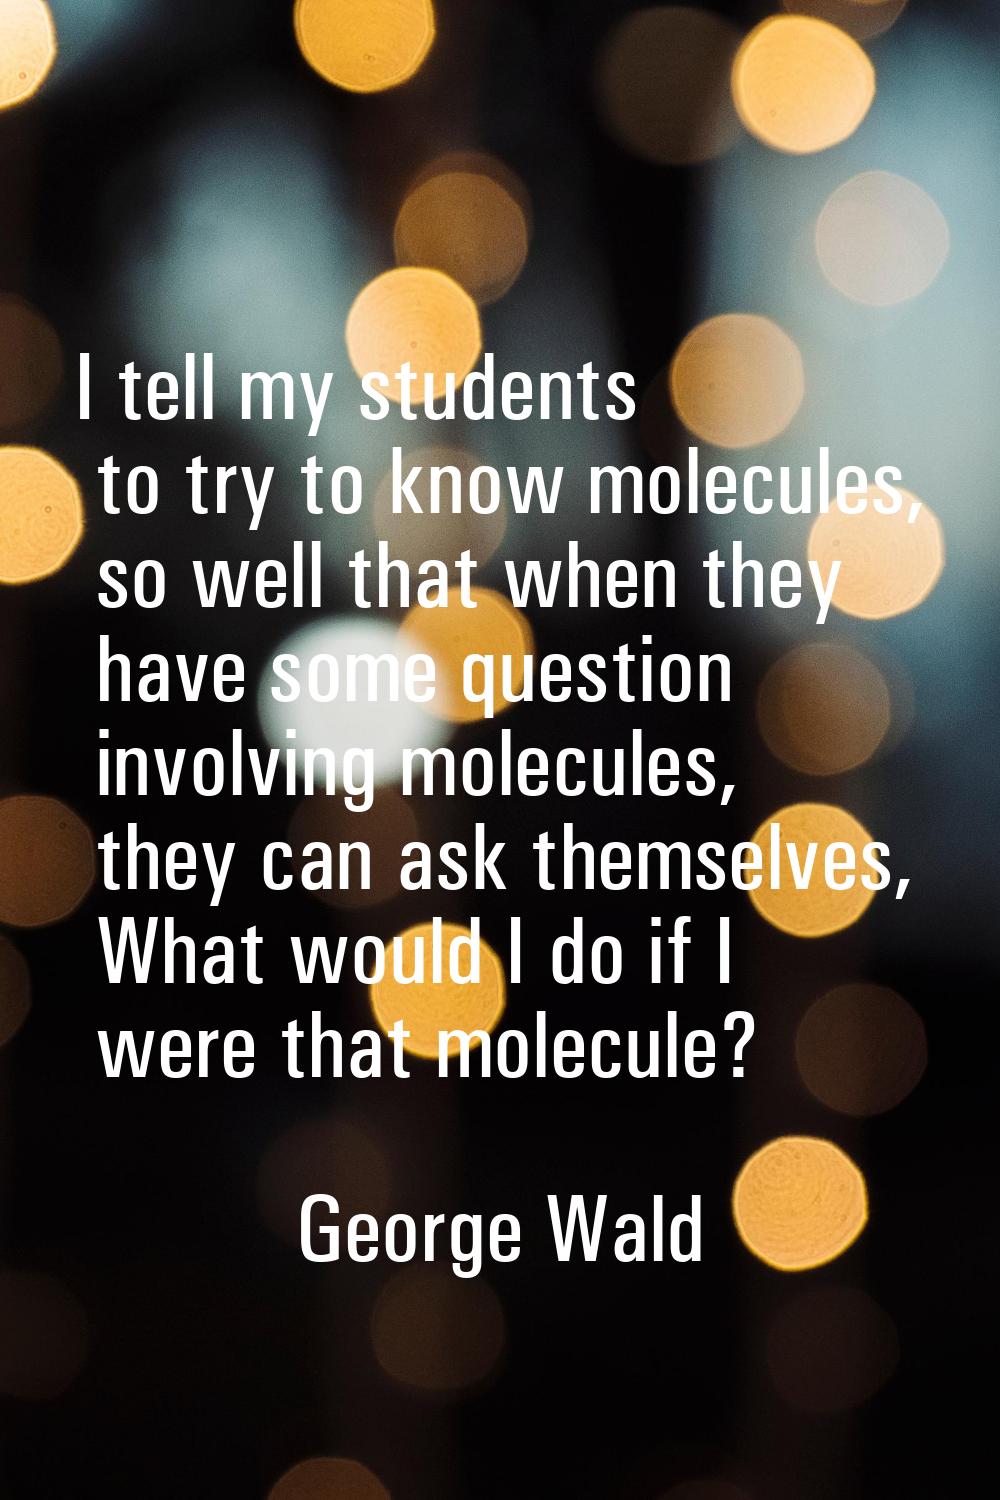 I tell my students to try to know molecules, so well that when they have some question involving mo